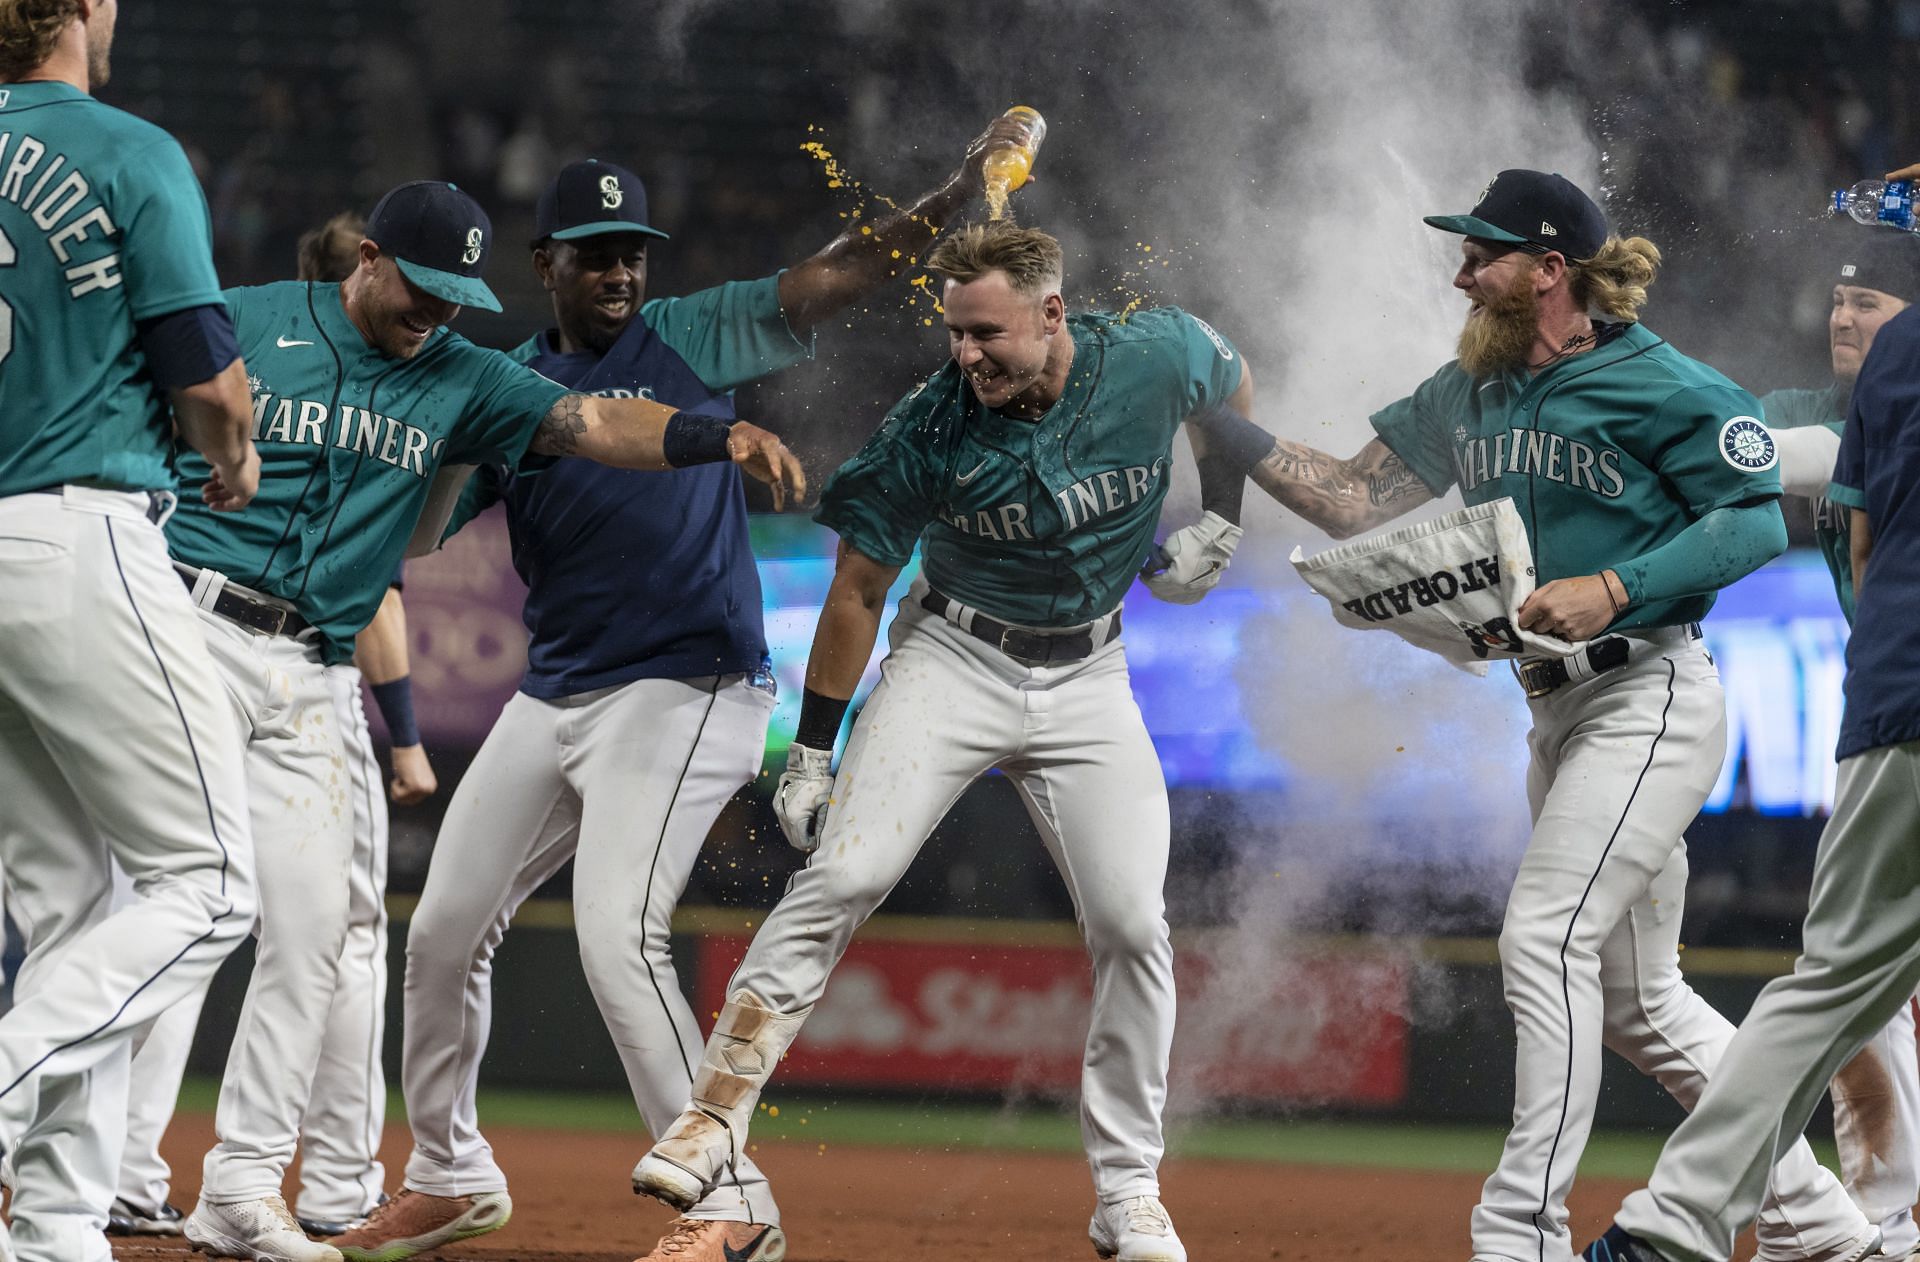 MARINERS BLANKED BY ADMIRALS TO OPEN THREEKEND